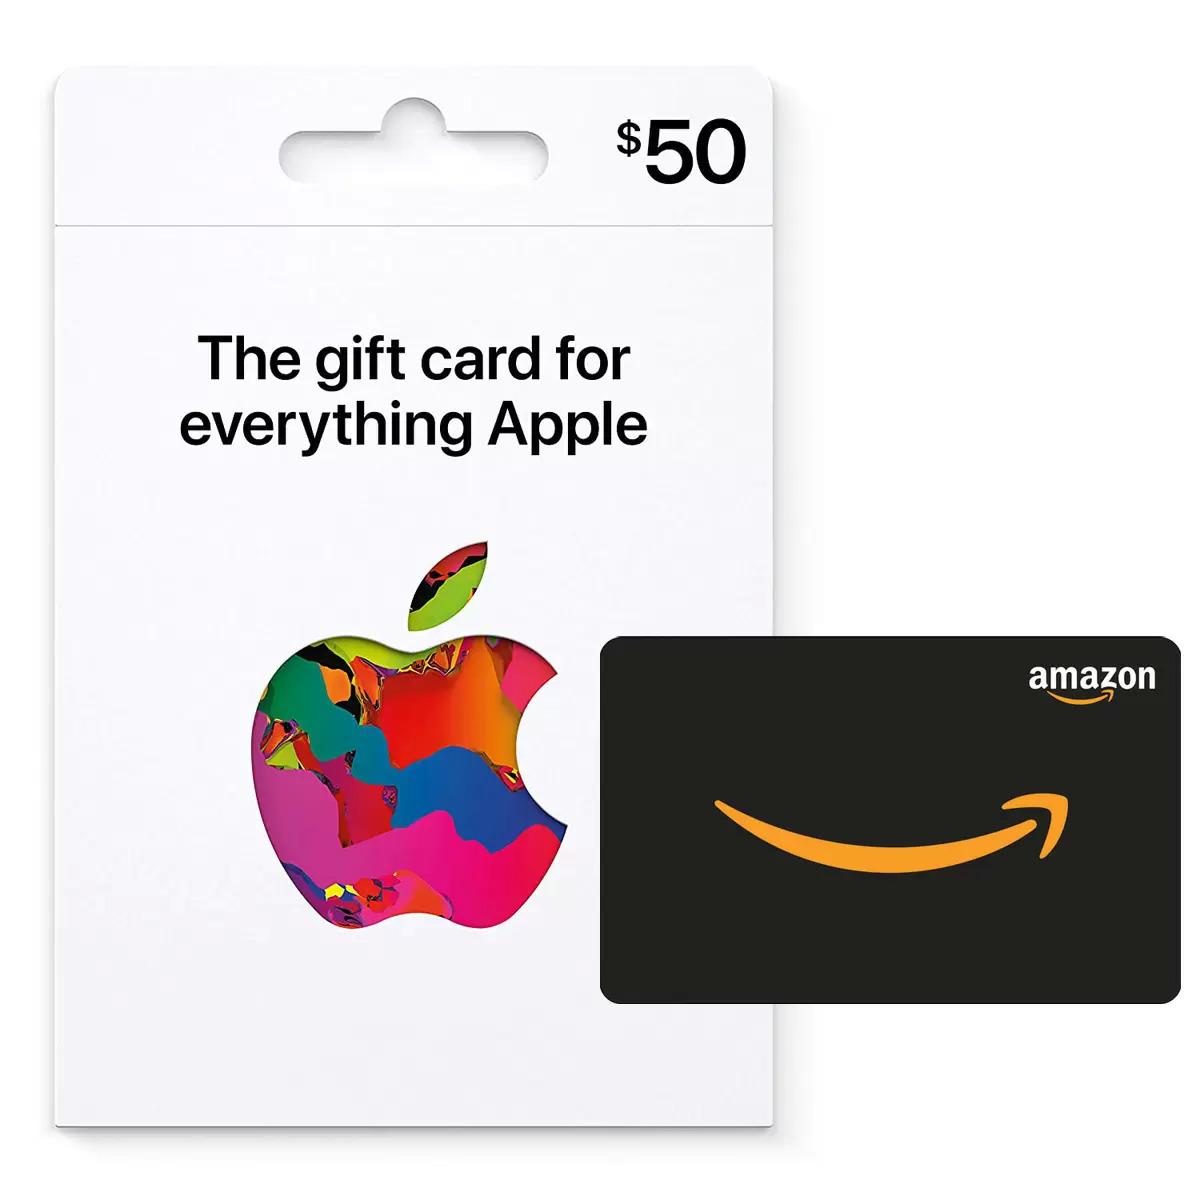 $50 Apple Gift Card with $5 Amazon Promo Credit for $50